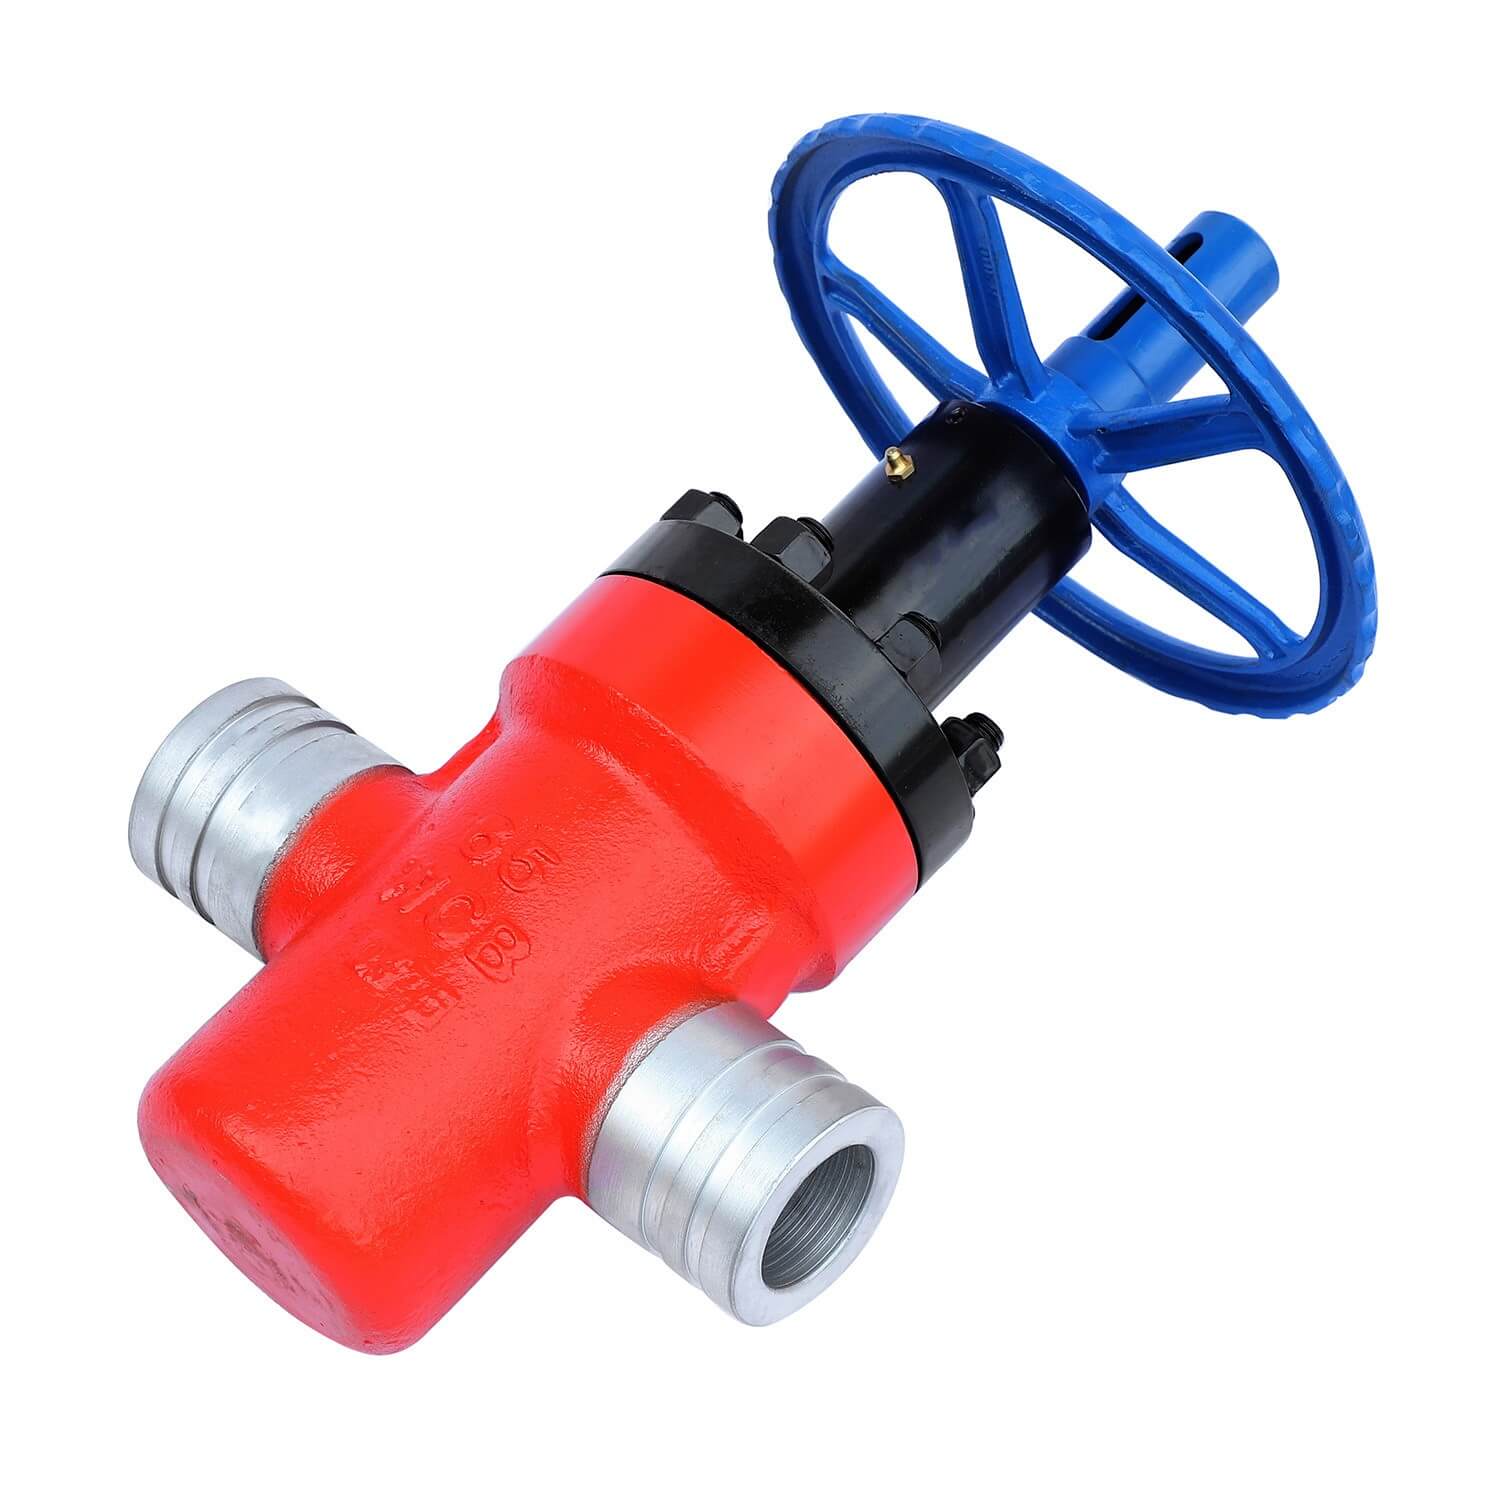 Stainless Steel China Gate Valve Business